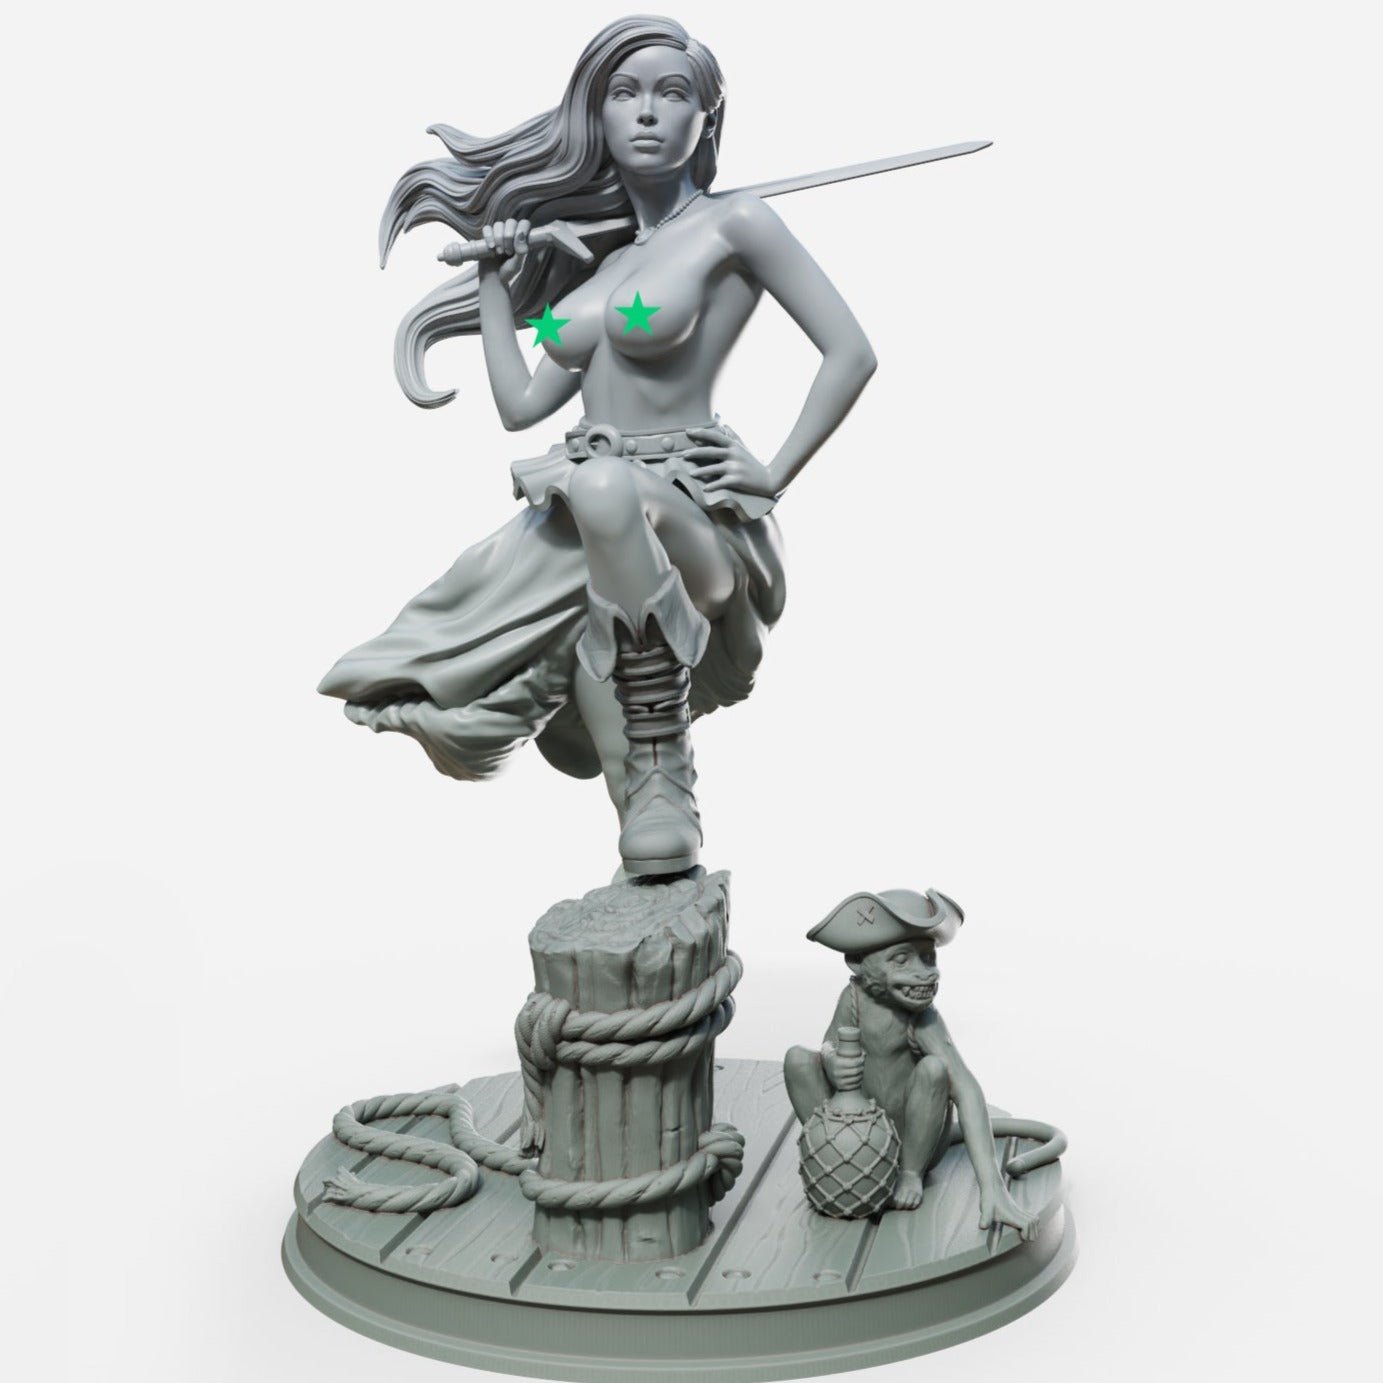 Marina 2 NSFW 3d Printed miniature FanArt by Female Miniatures Scaled Collectables Statues & Figurines